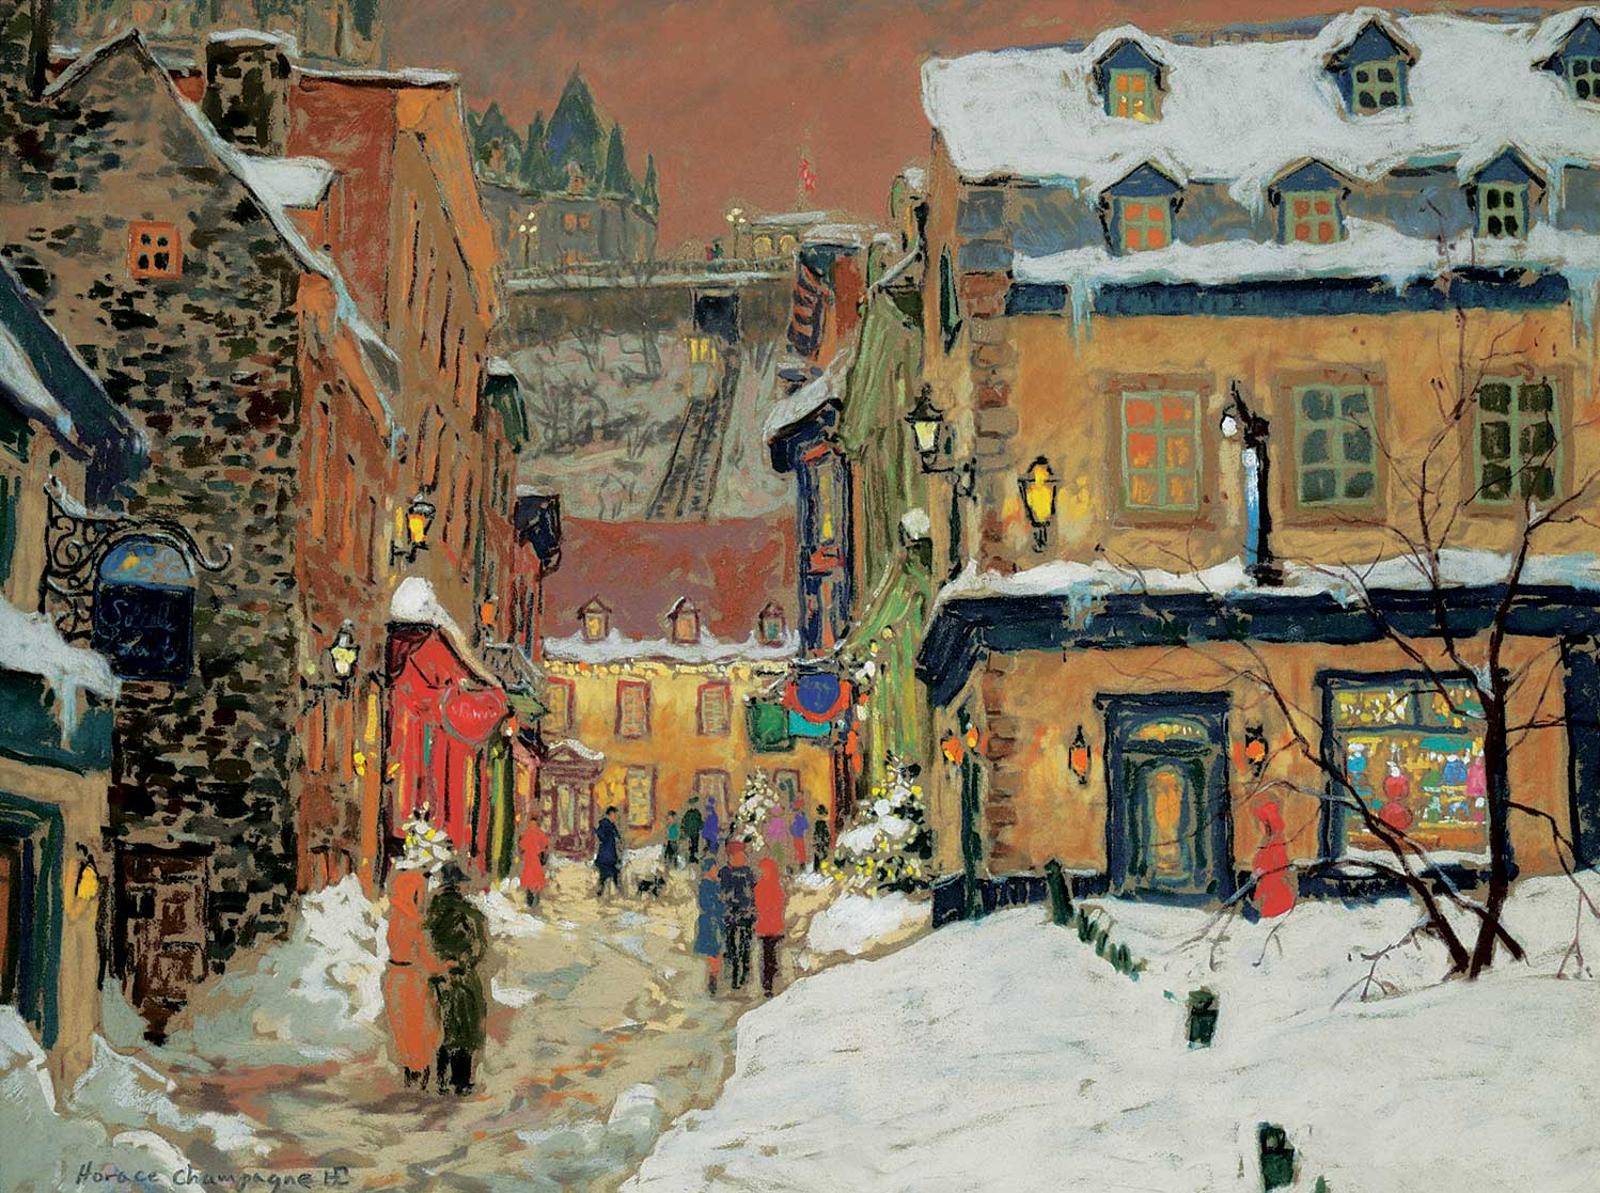 Horace Champagne (1937) - The Magic of Old Quebec, City at Twilight